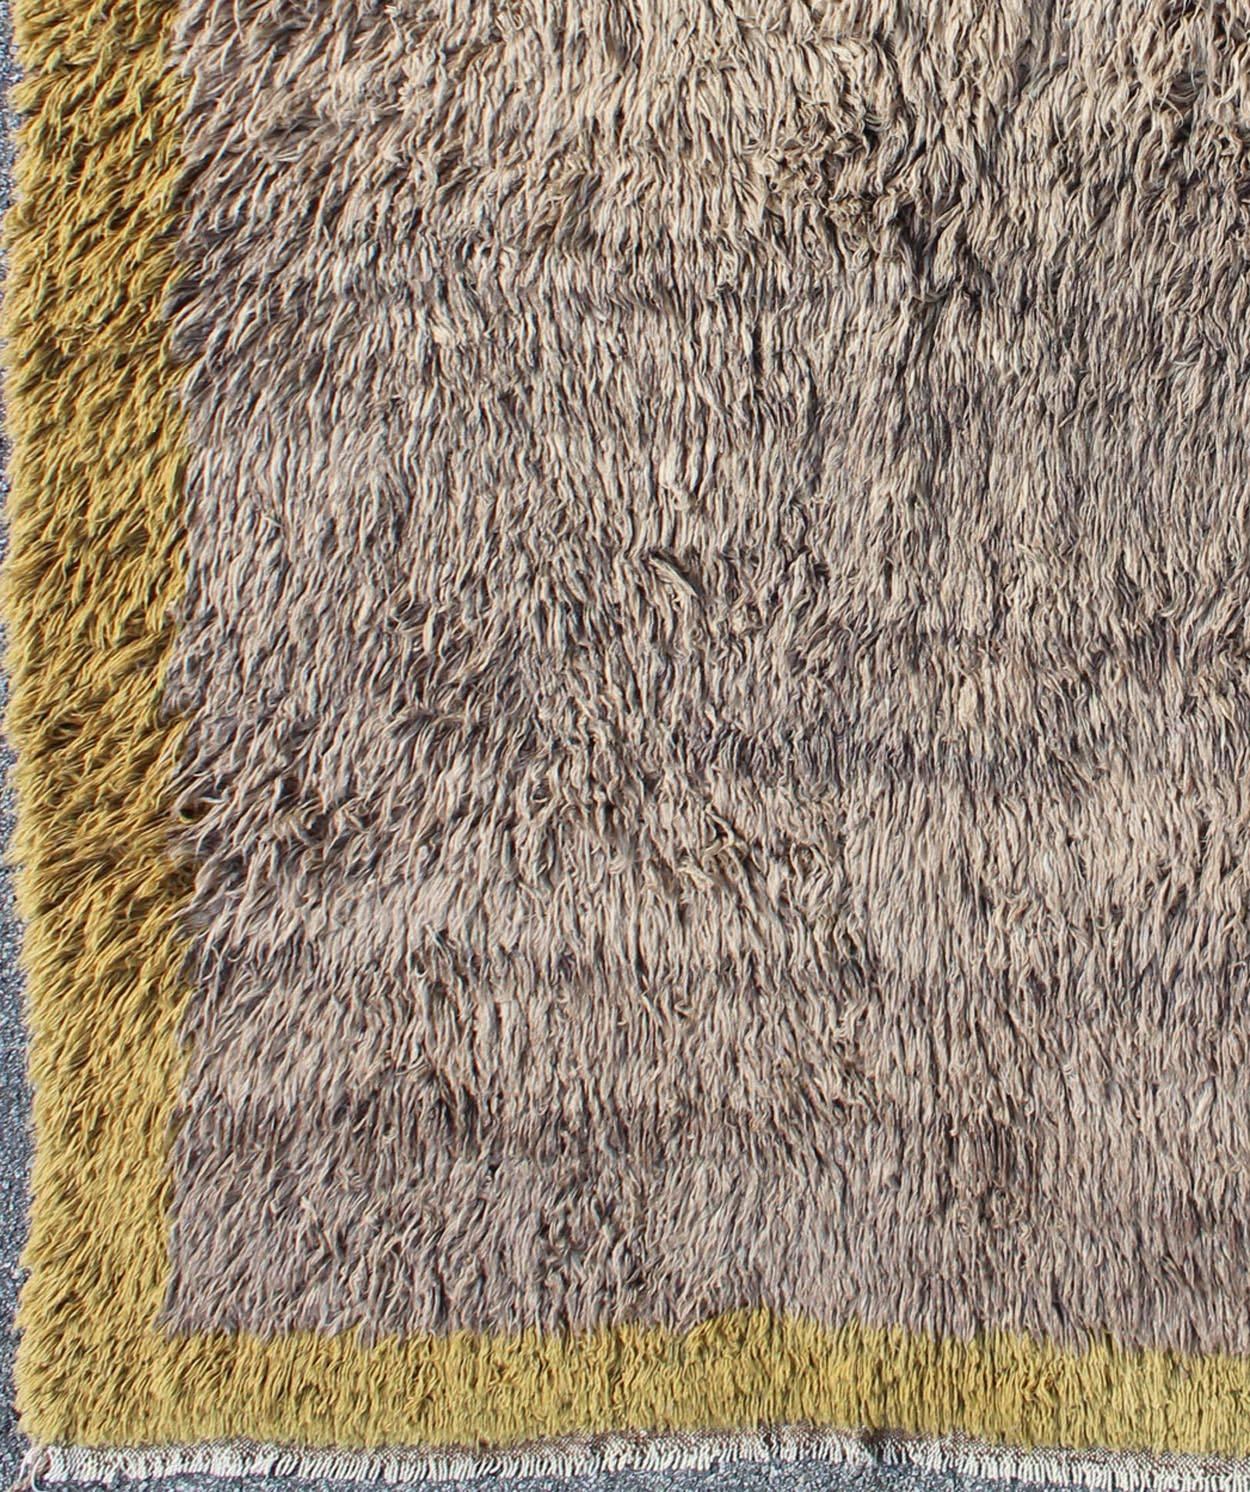 Modern Vintage Turkish Tulu rug with open field in gray and cream / yellow, rug ned-136582, country of origin / type: Turkey / Tulu, circa mid-20th century. Keivan Woven Arts 

This vintage Tulu rug from Turkey (circa mid-20th century) is